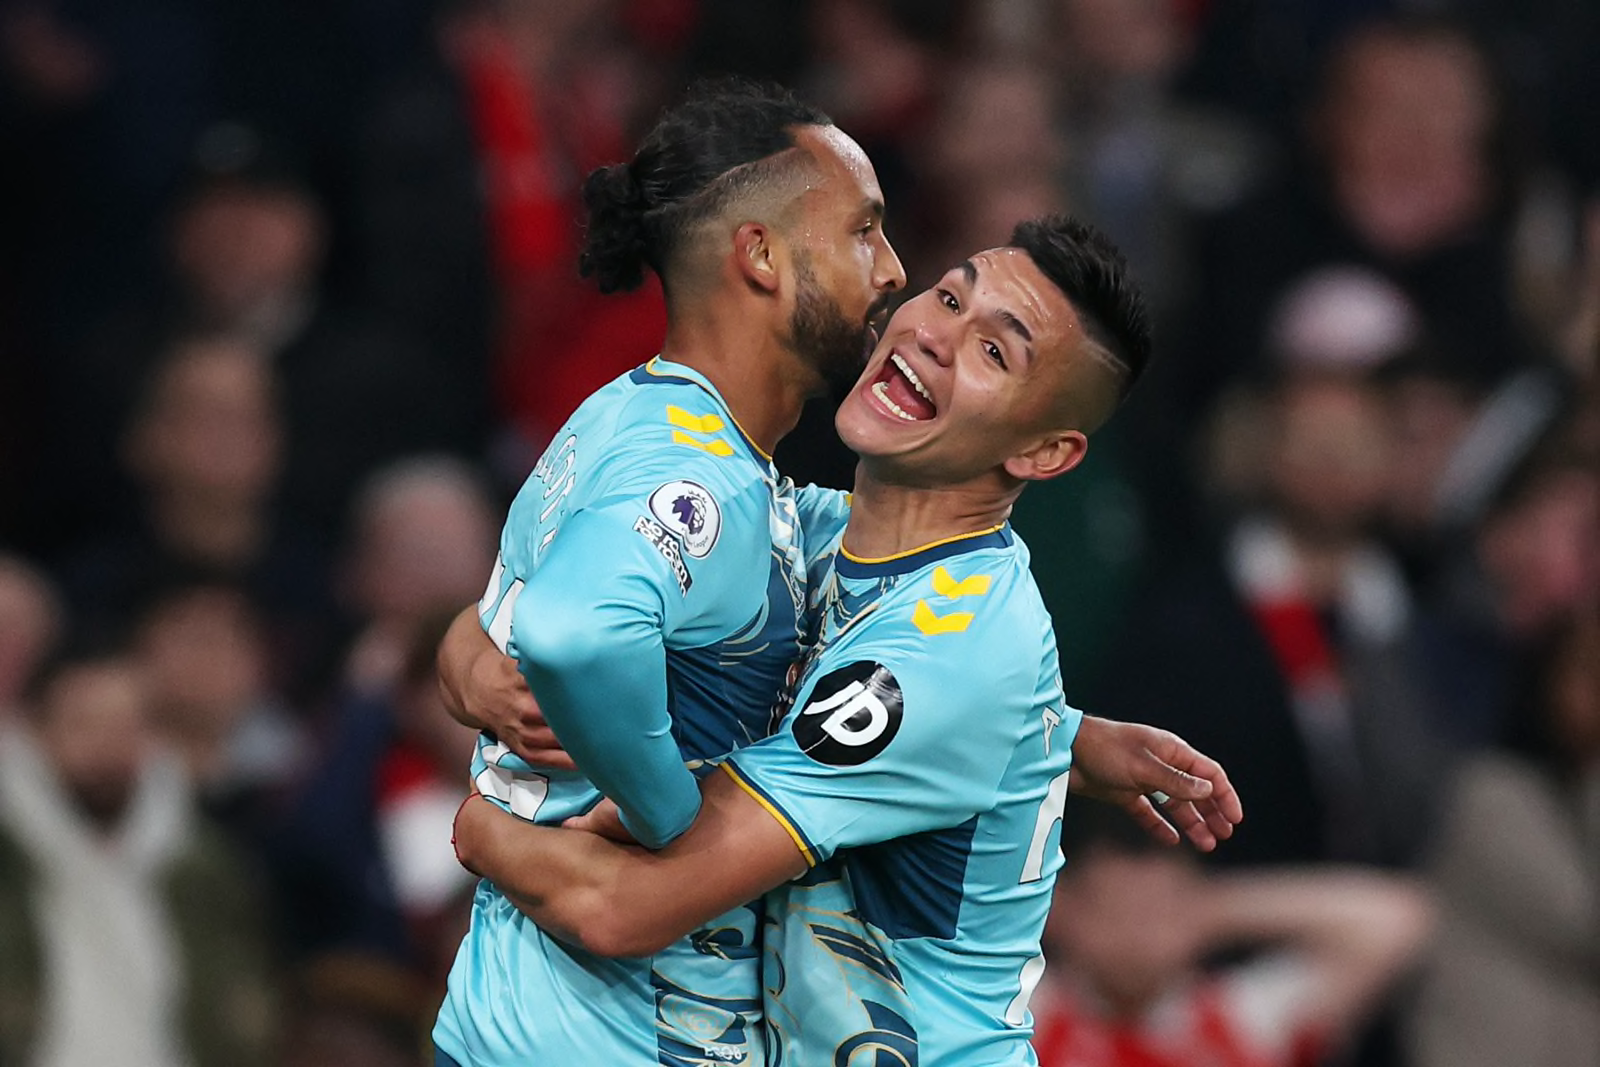 Theo Walcott of Southampton (L) celebrates with teammate Carlos Alcaraz after scoring the team's second goal during the Premier League match between Arsenal FC and Southampton FC at Emirates Stadium on April 21, 2023 in London, England.